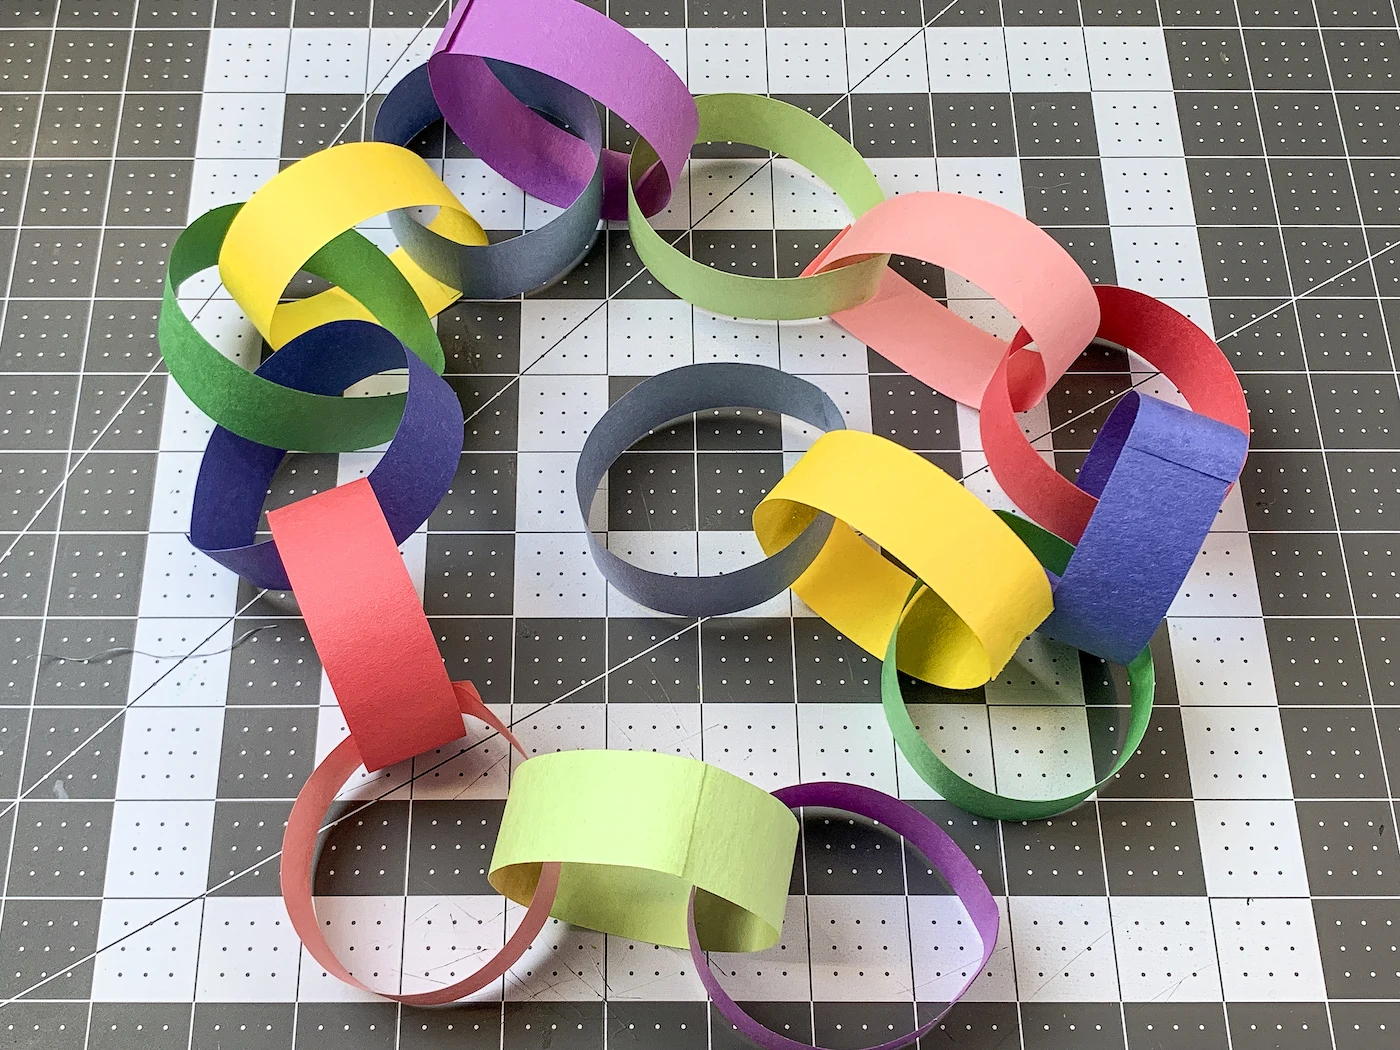 How To Make Paper Chain, Paper Crafts, Easy Diy, Tutorial